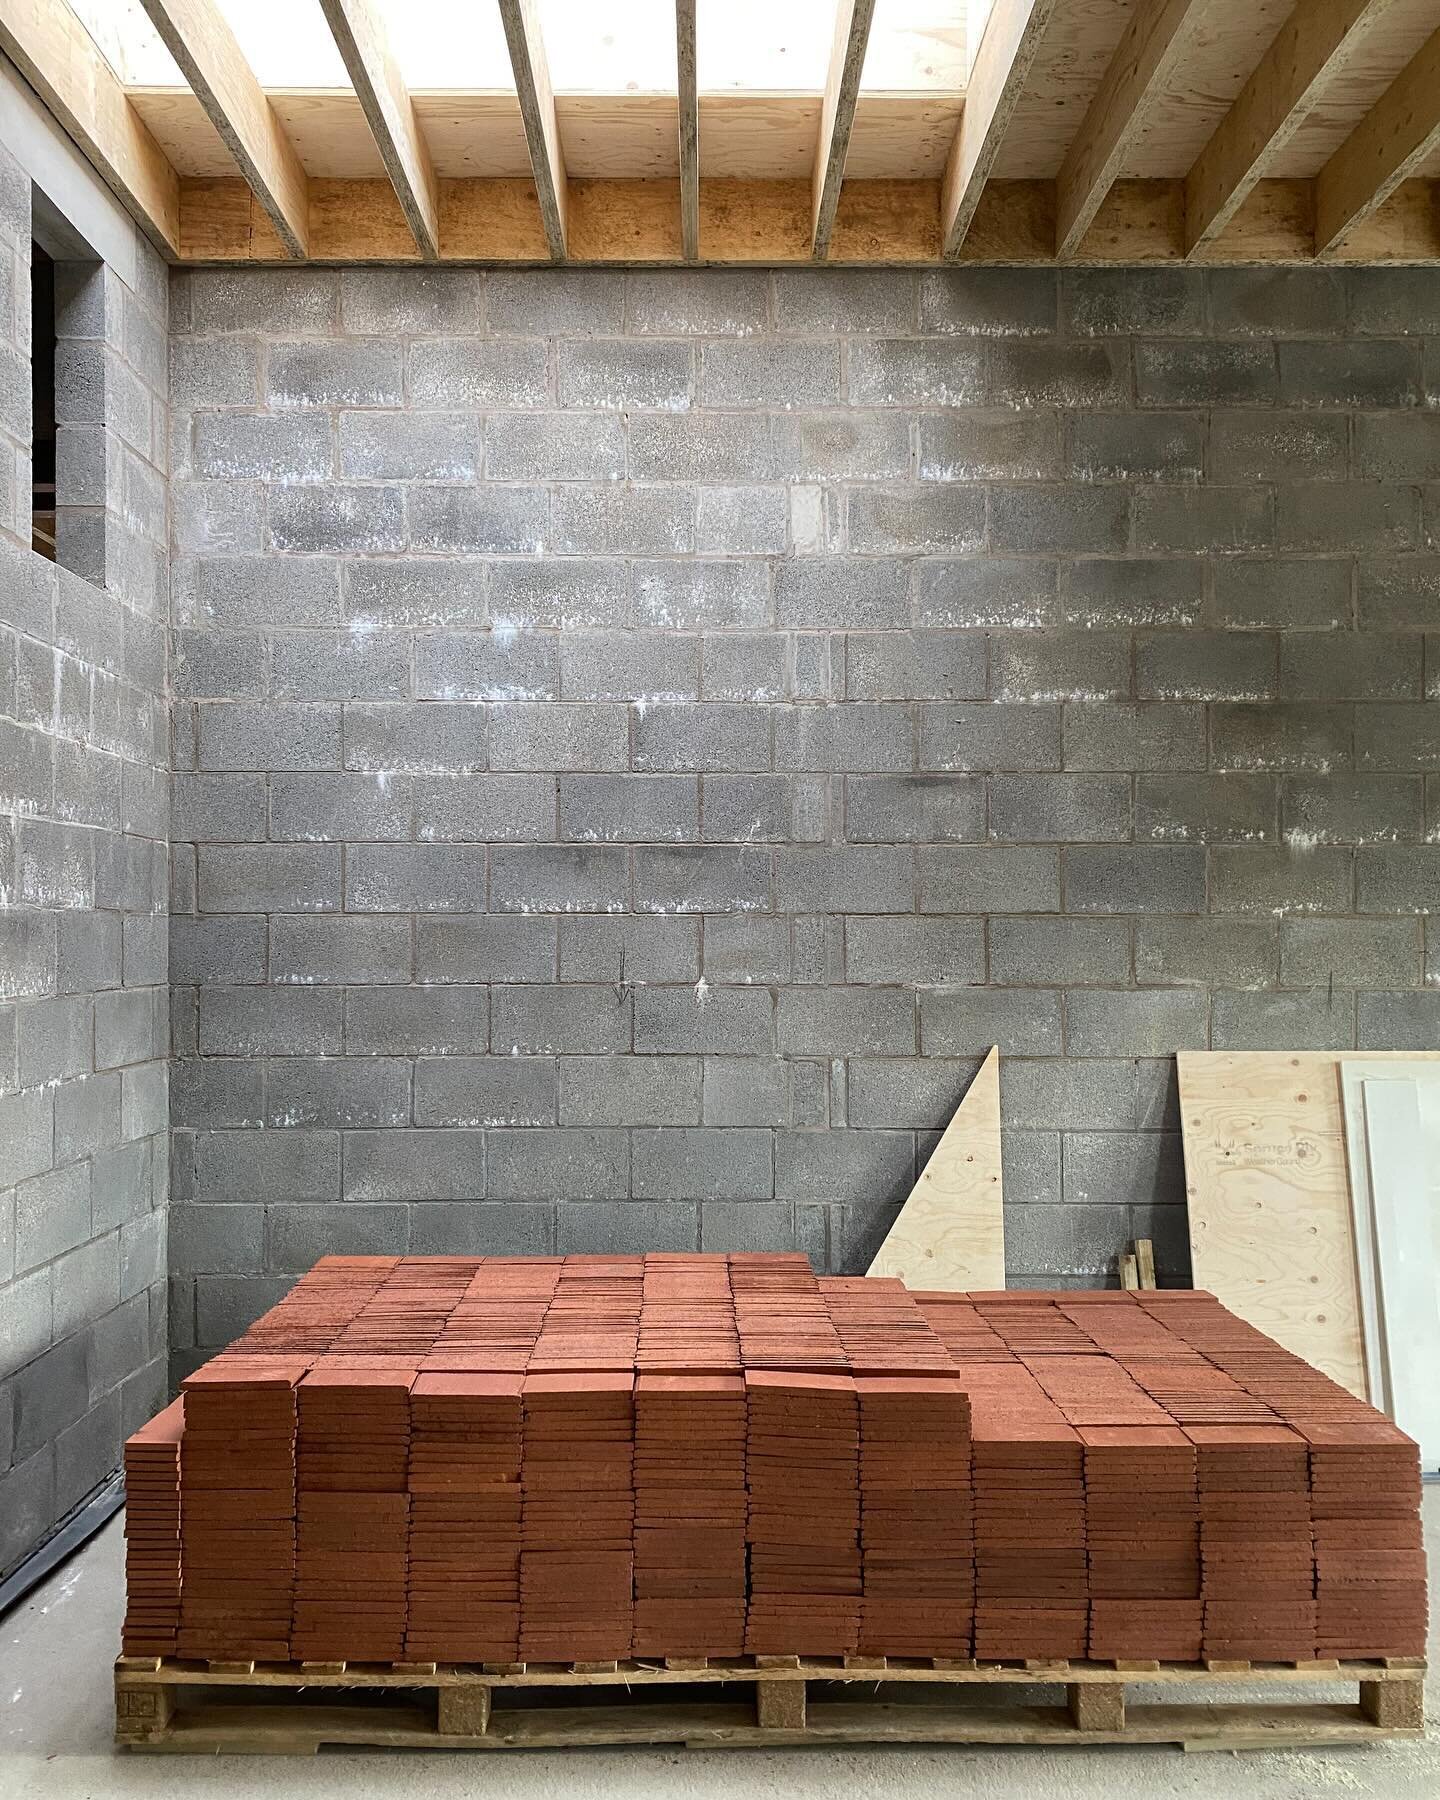 Approximately 3000 quarry tiles laid by our own fair hands! 
An epic and challenging process but delighted with the results.

#ketleybrick #quarrytiles #workinprogress #irisharchitecture #northernirisharchitecture #selfbuildireland #belfast #renovati